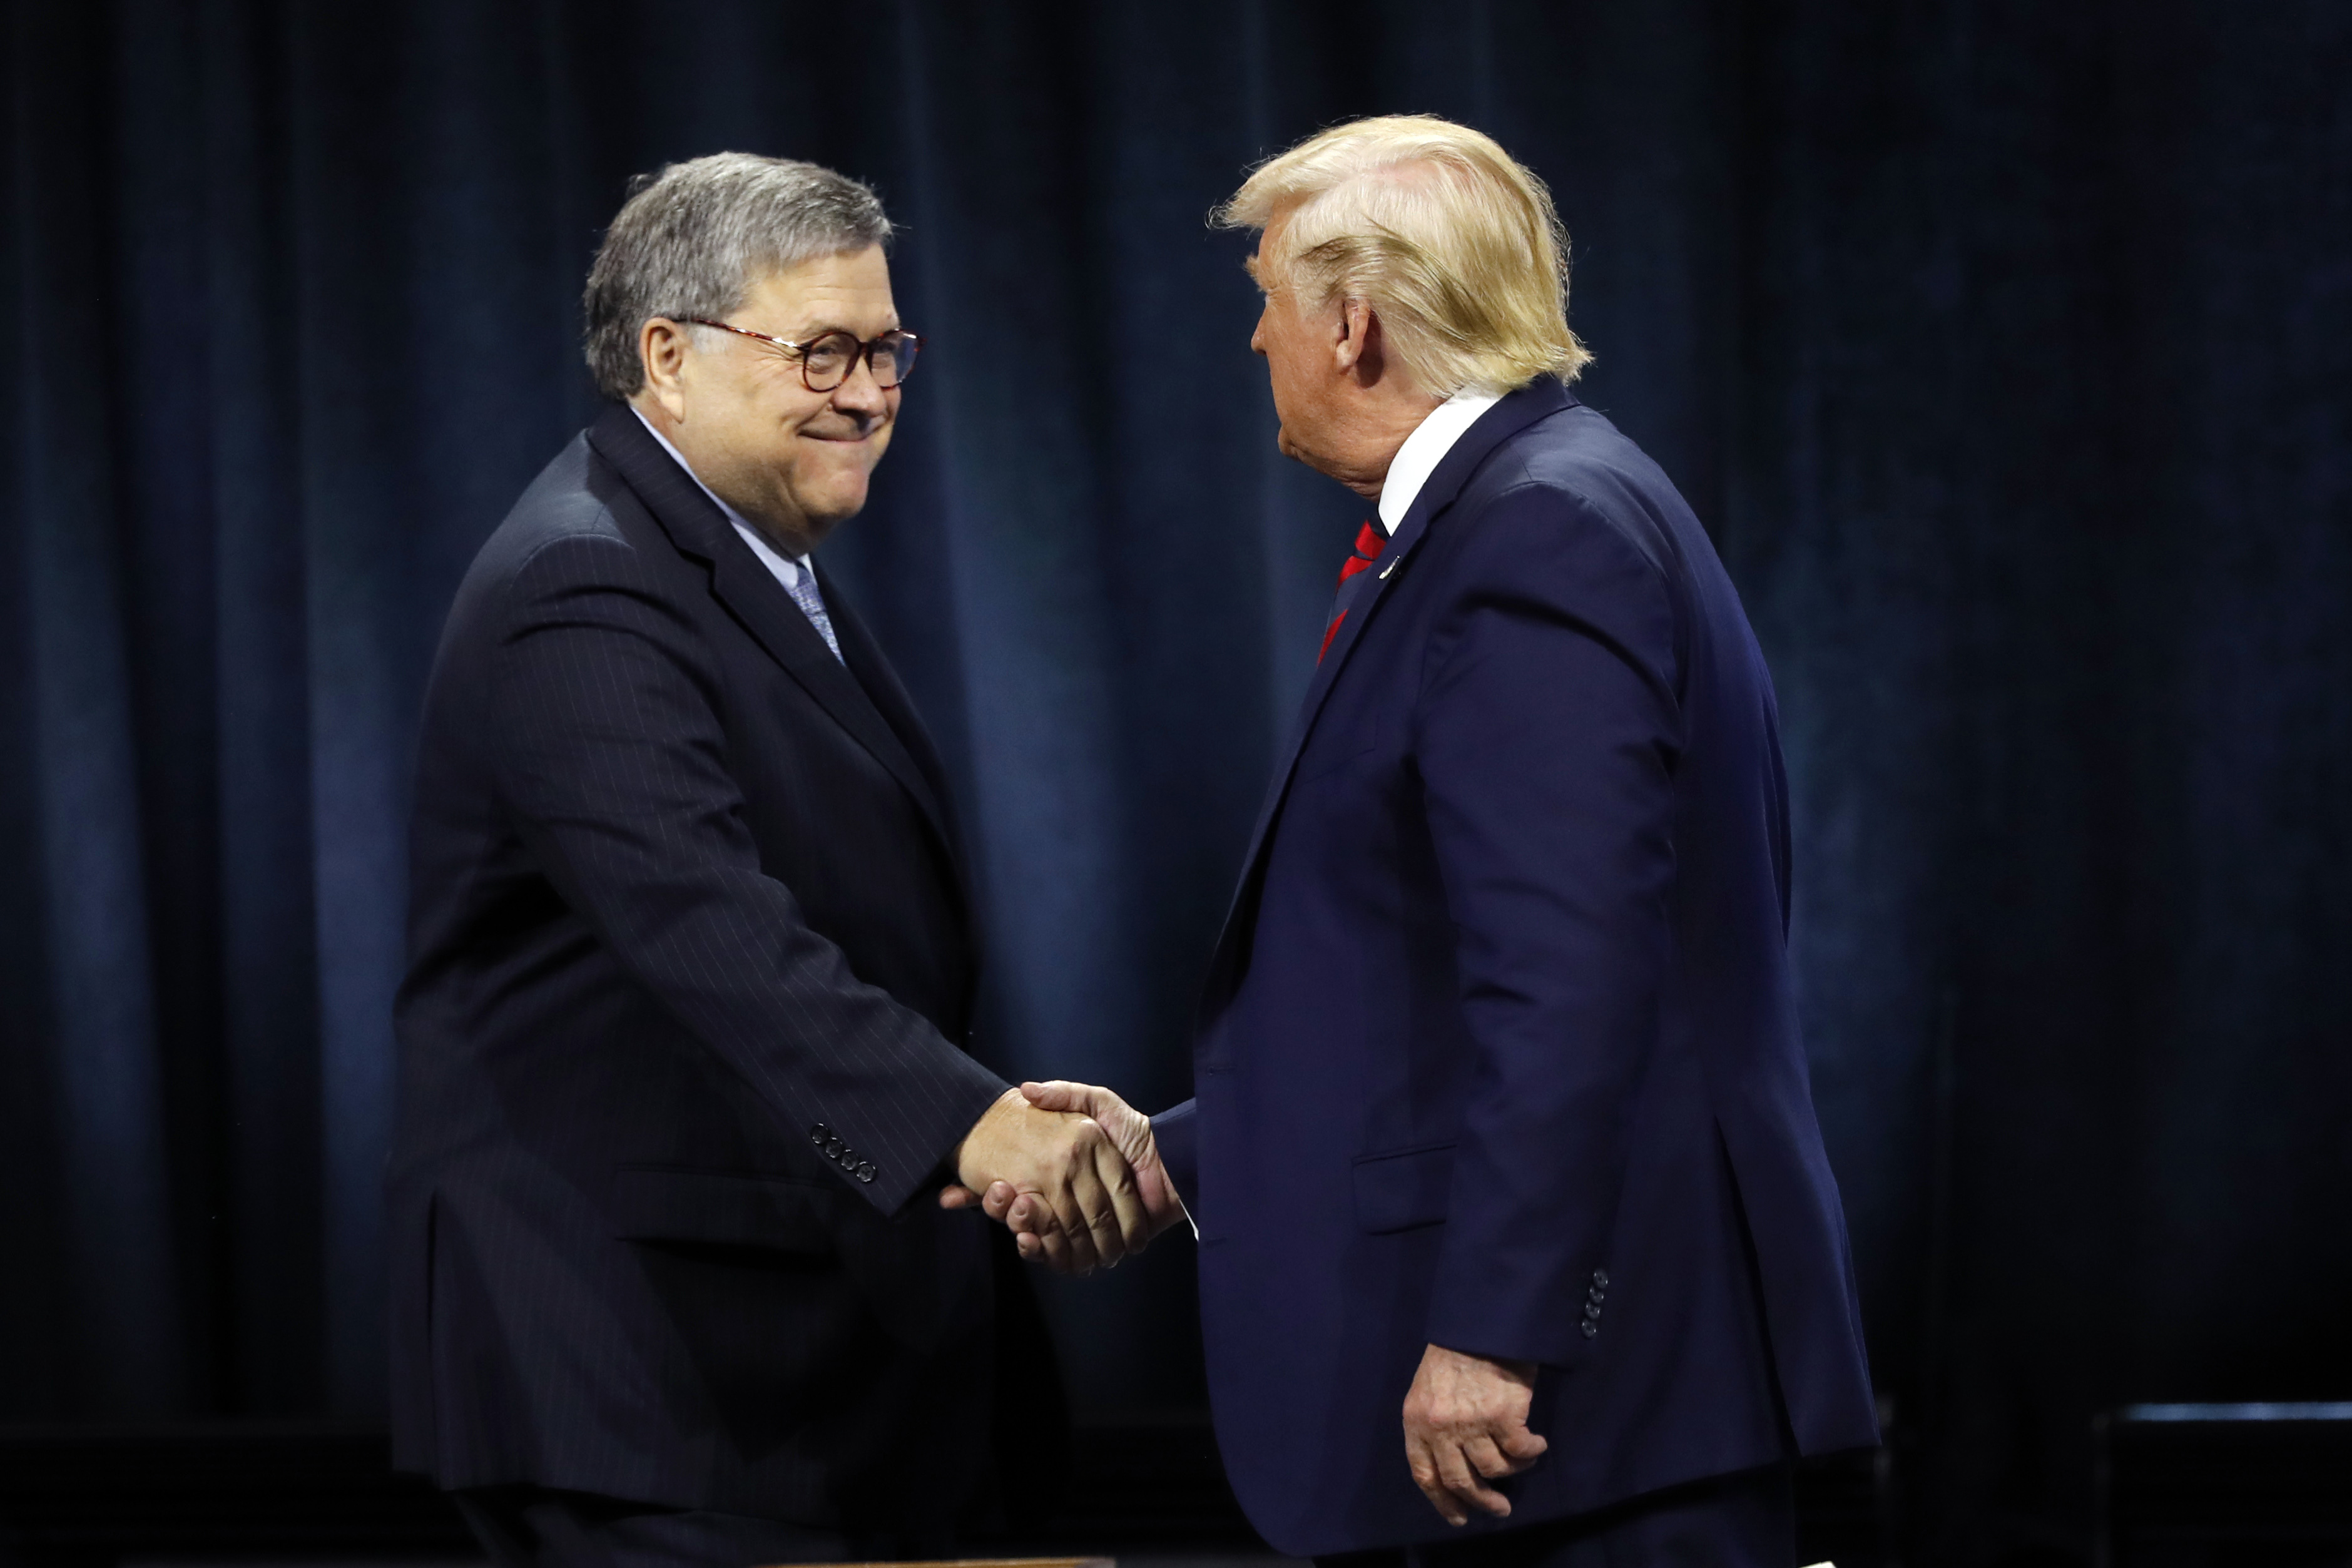 Trump Denies He Wanted Barr To Publicly Clear Him - Vos Iz Neias3759 x 2506